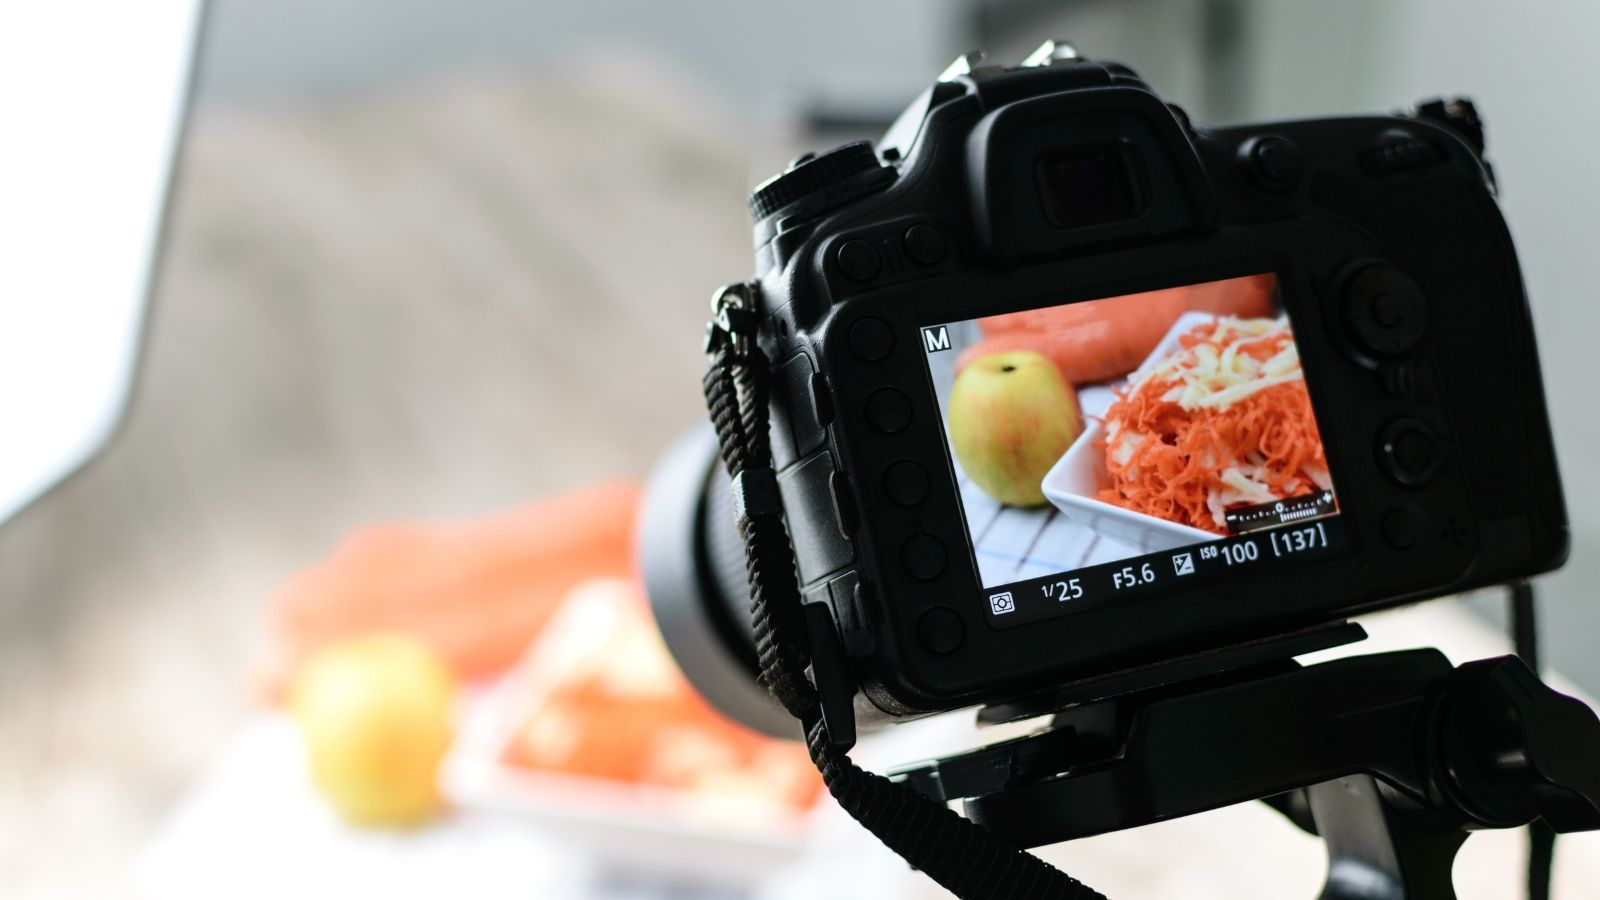 Food Photography Tips: How to Take Better Photos for Your Restaurant